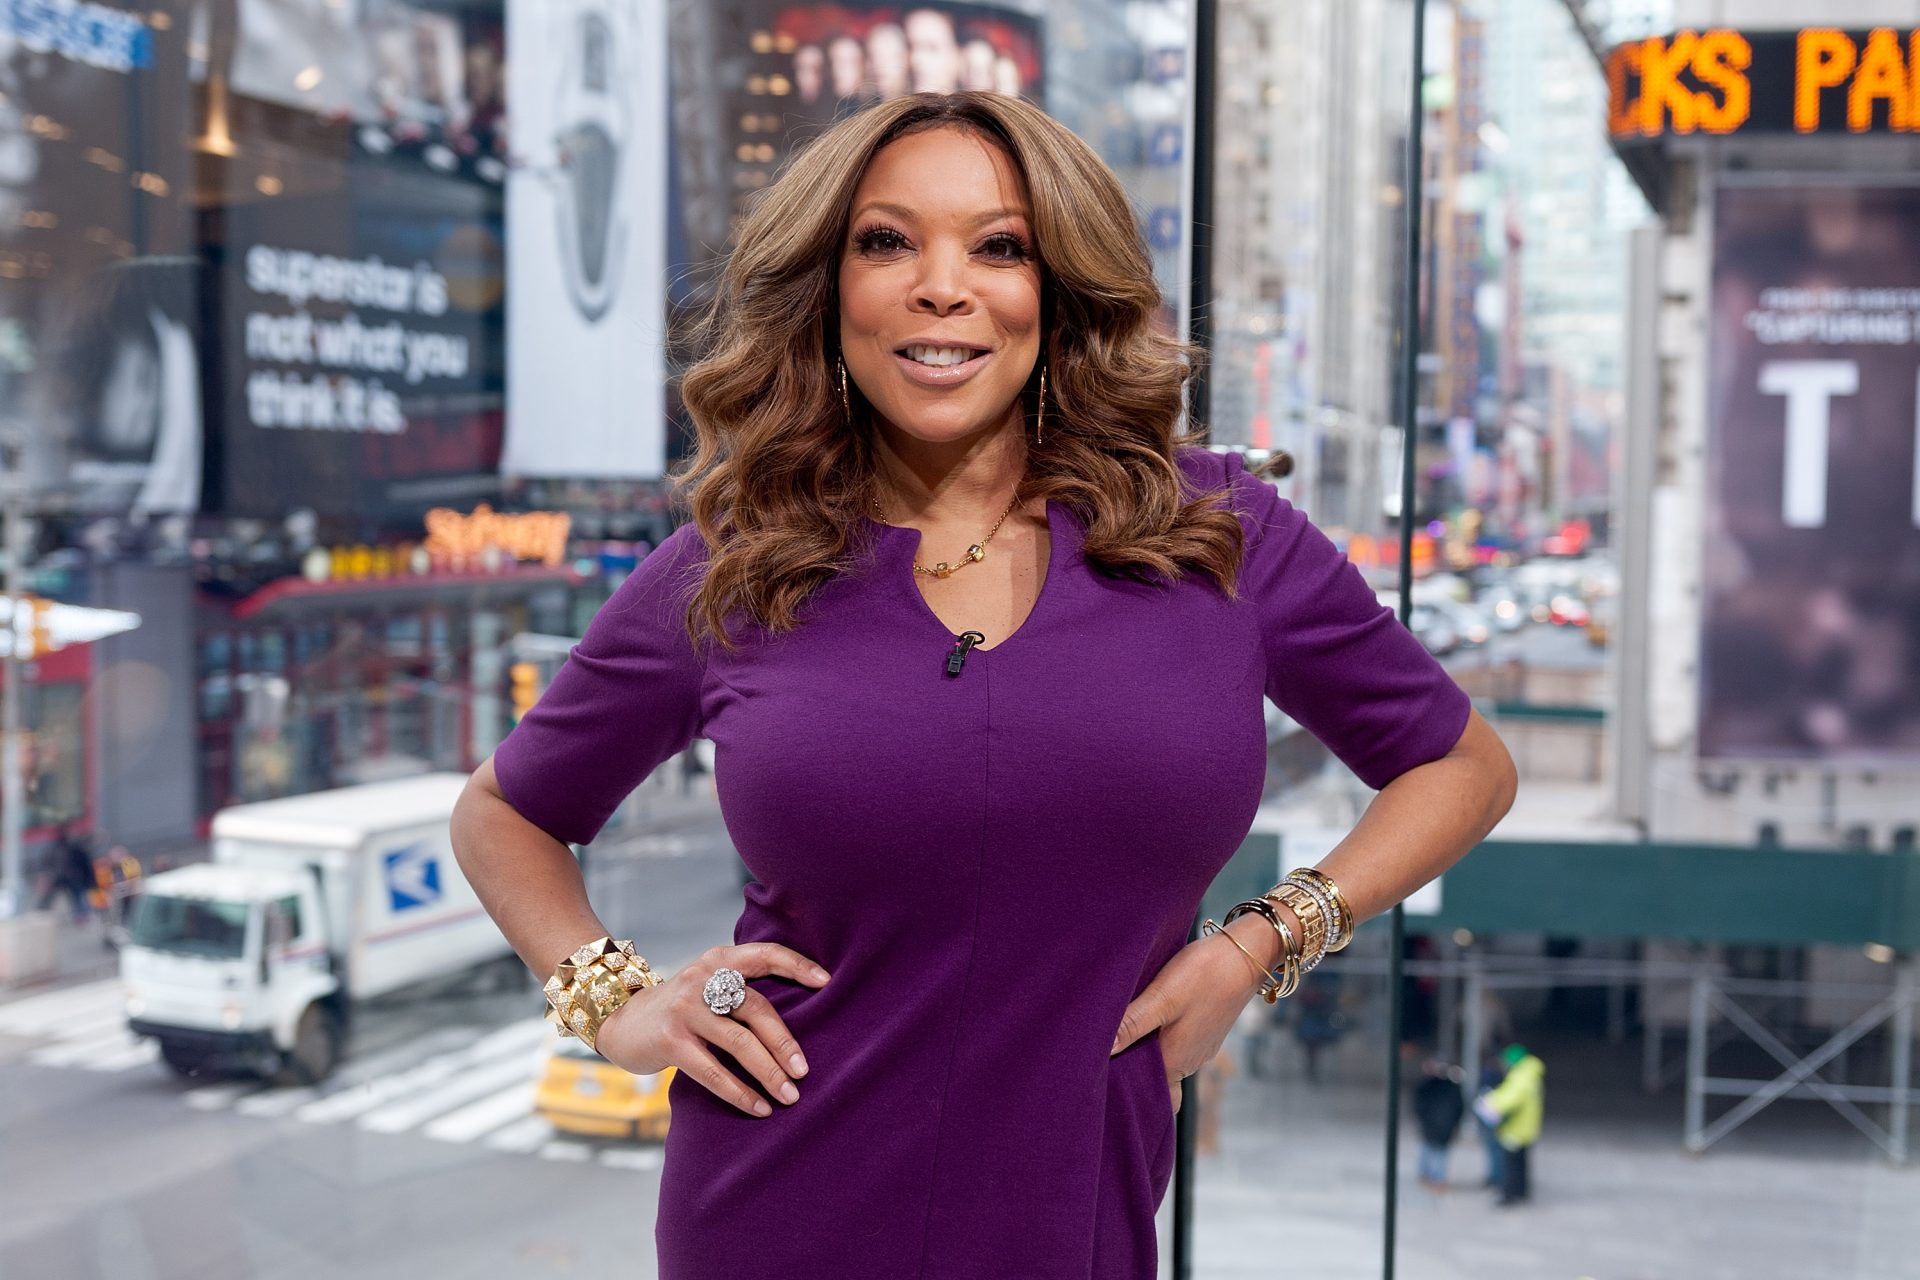 Dementia and aphasia: TV star Wendy Williams' diagnoses